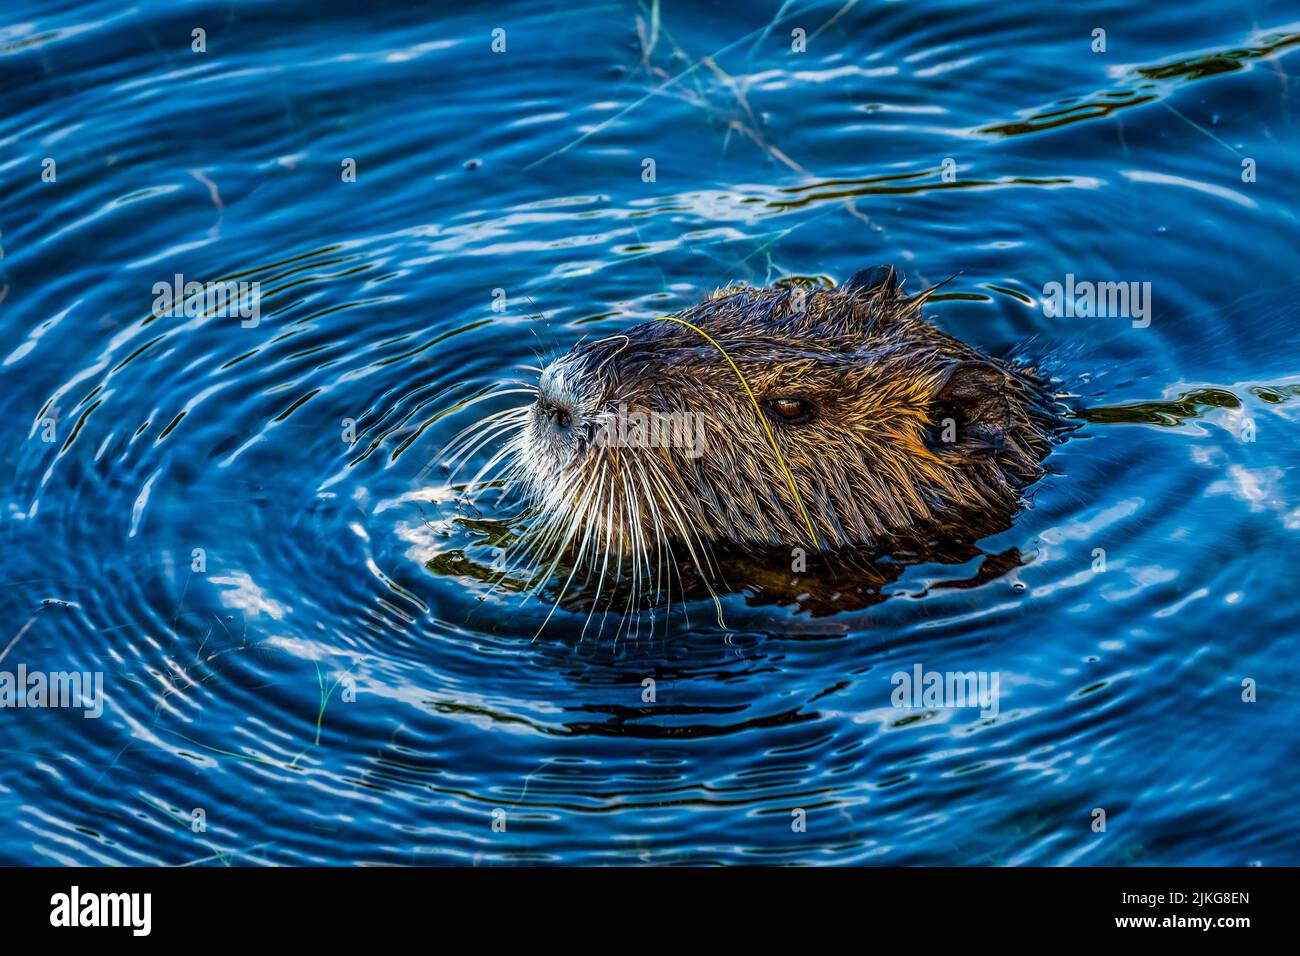 A wet nutria swimming the water Stock Photo